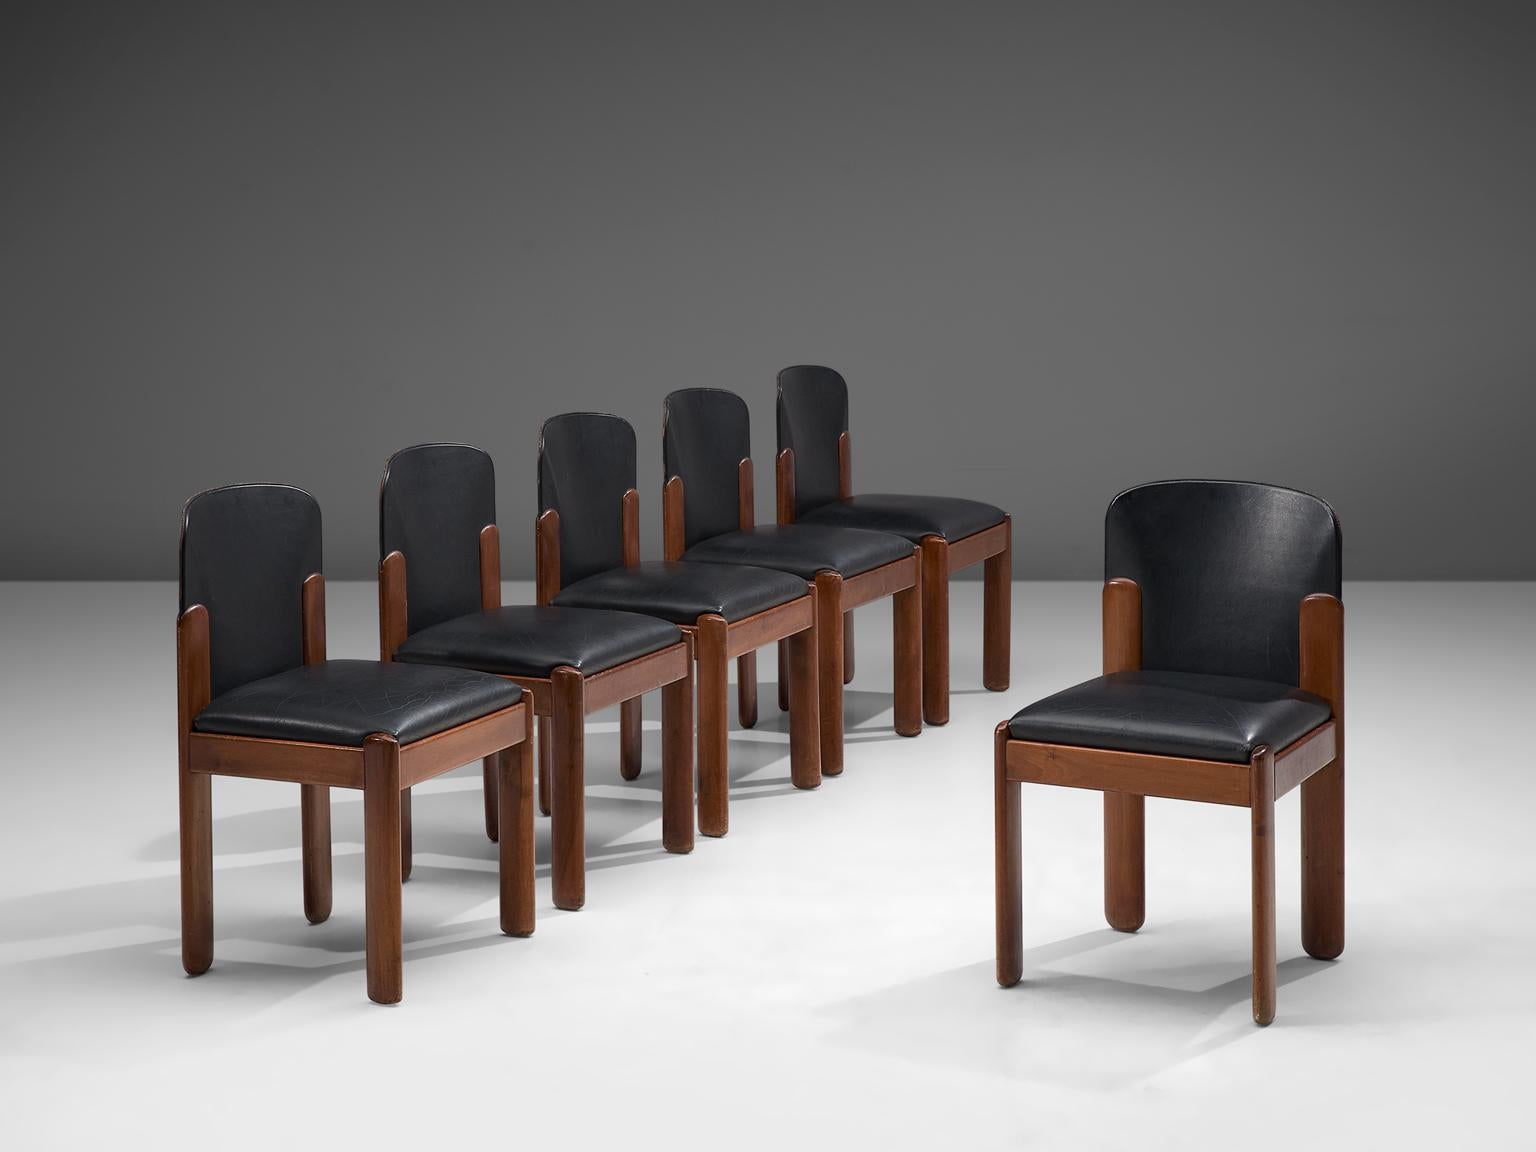 Silvio Coppola For Bernini Italy, set of 6 chairs, black leatherette and stained beech, Italy, 1960s
 
Set of 6 chairs by Italian designer Silvio Coppola. These chairs have a cubic and architectural appearance. The base consist of four straight